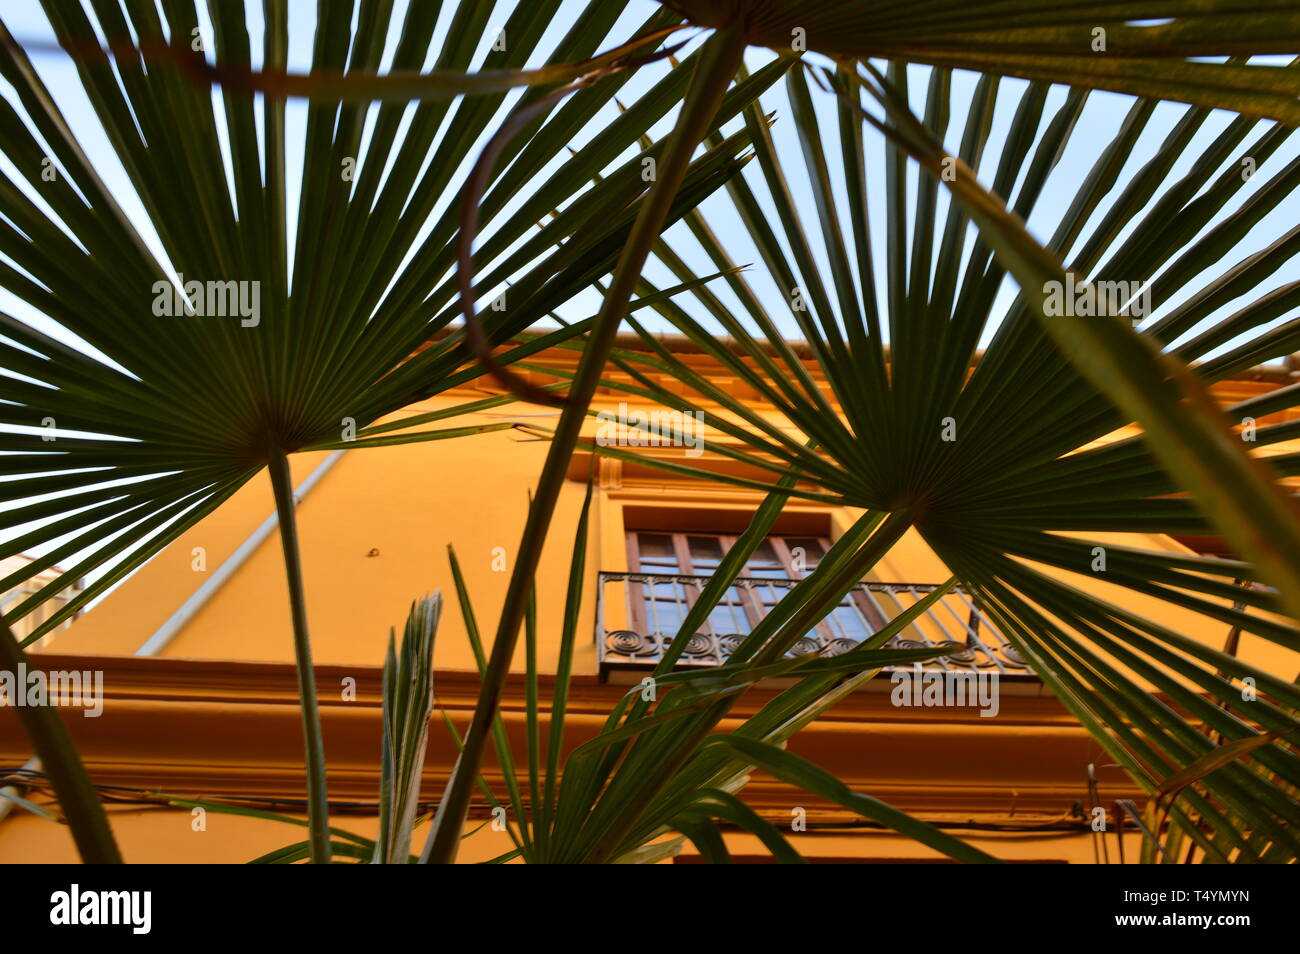 Through the palm leaves. Valencia Old Town Stock Photo